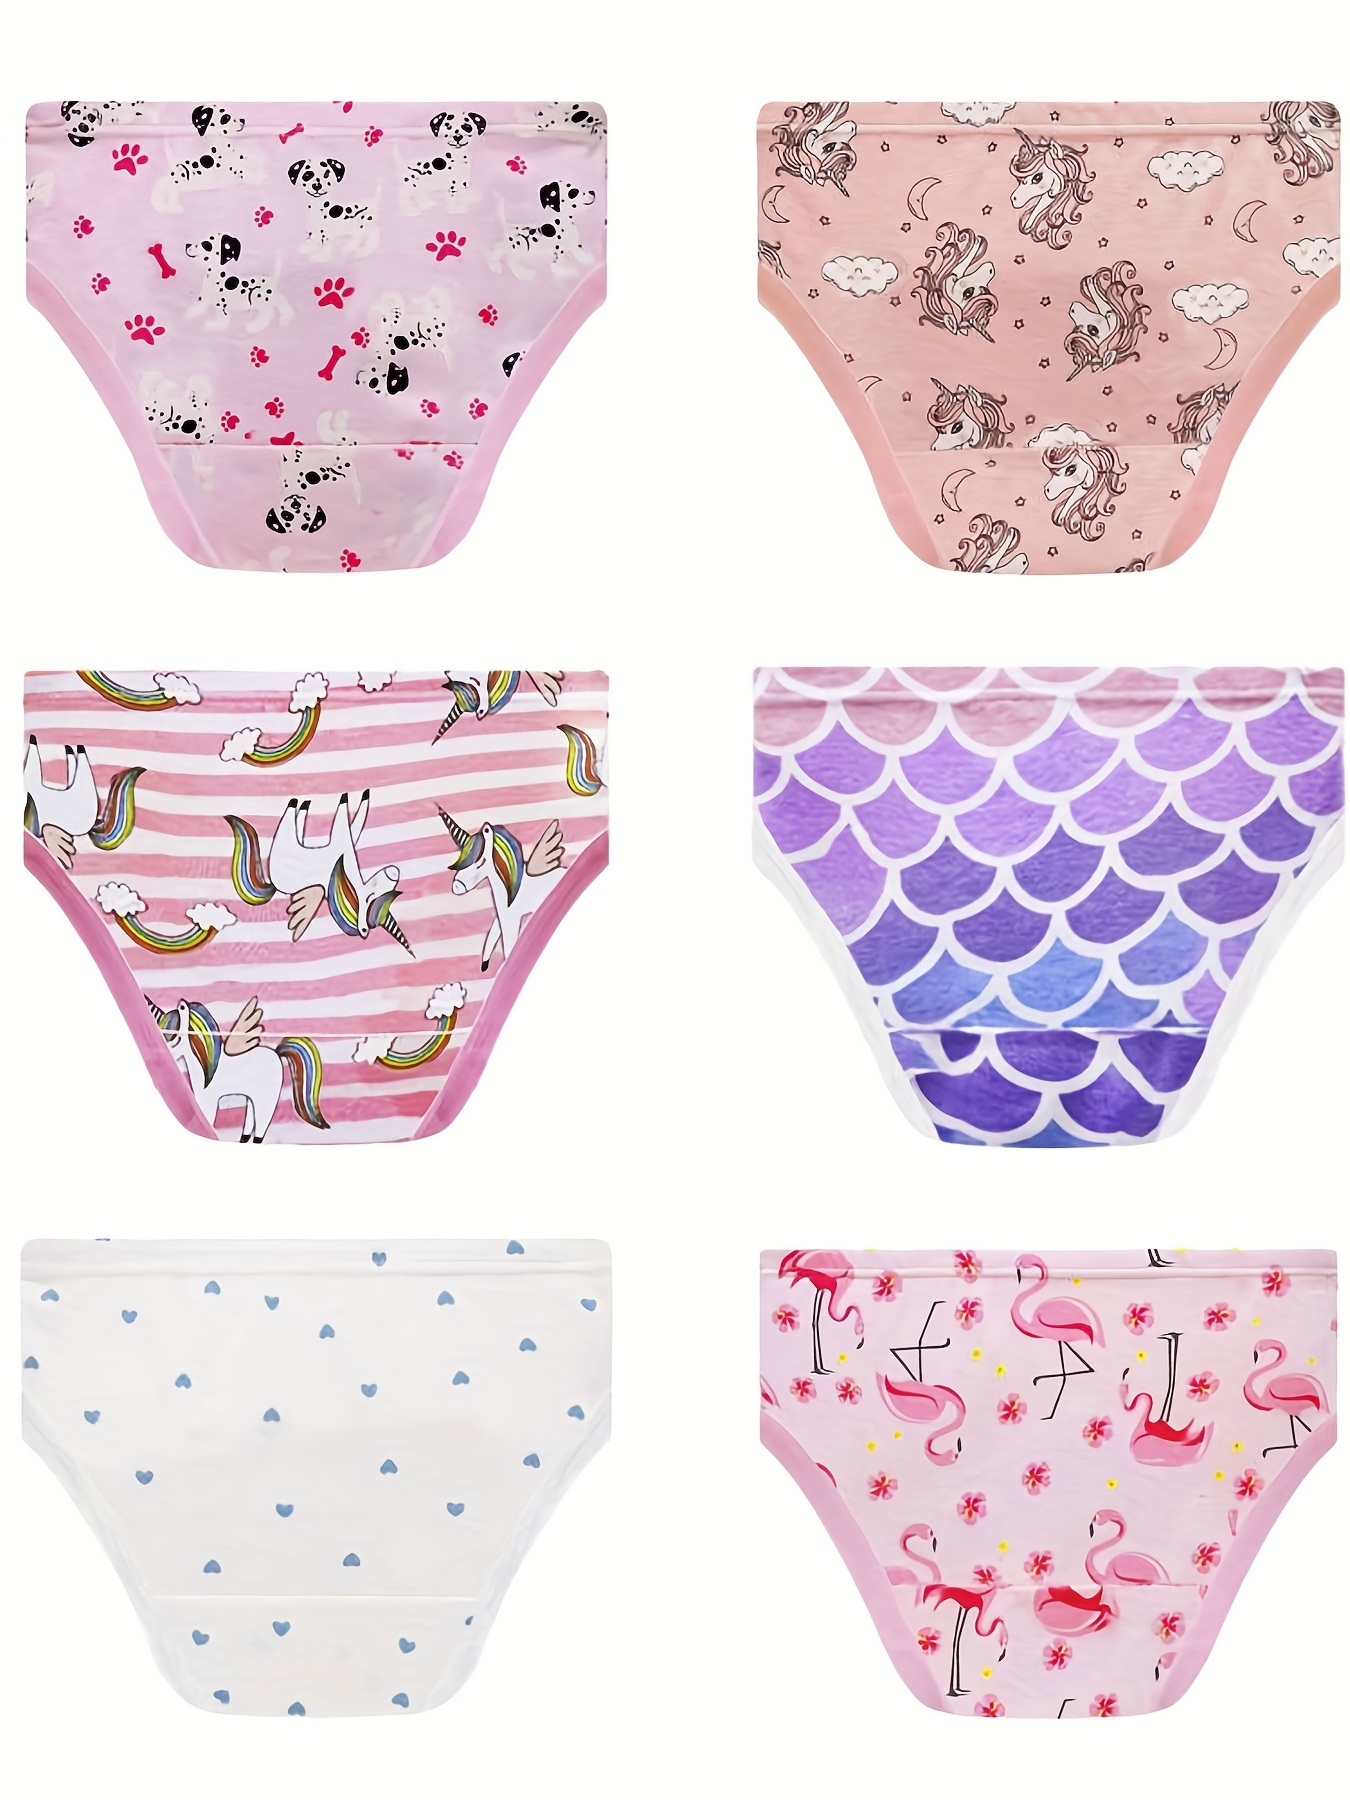 Panties for little and big girls